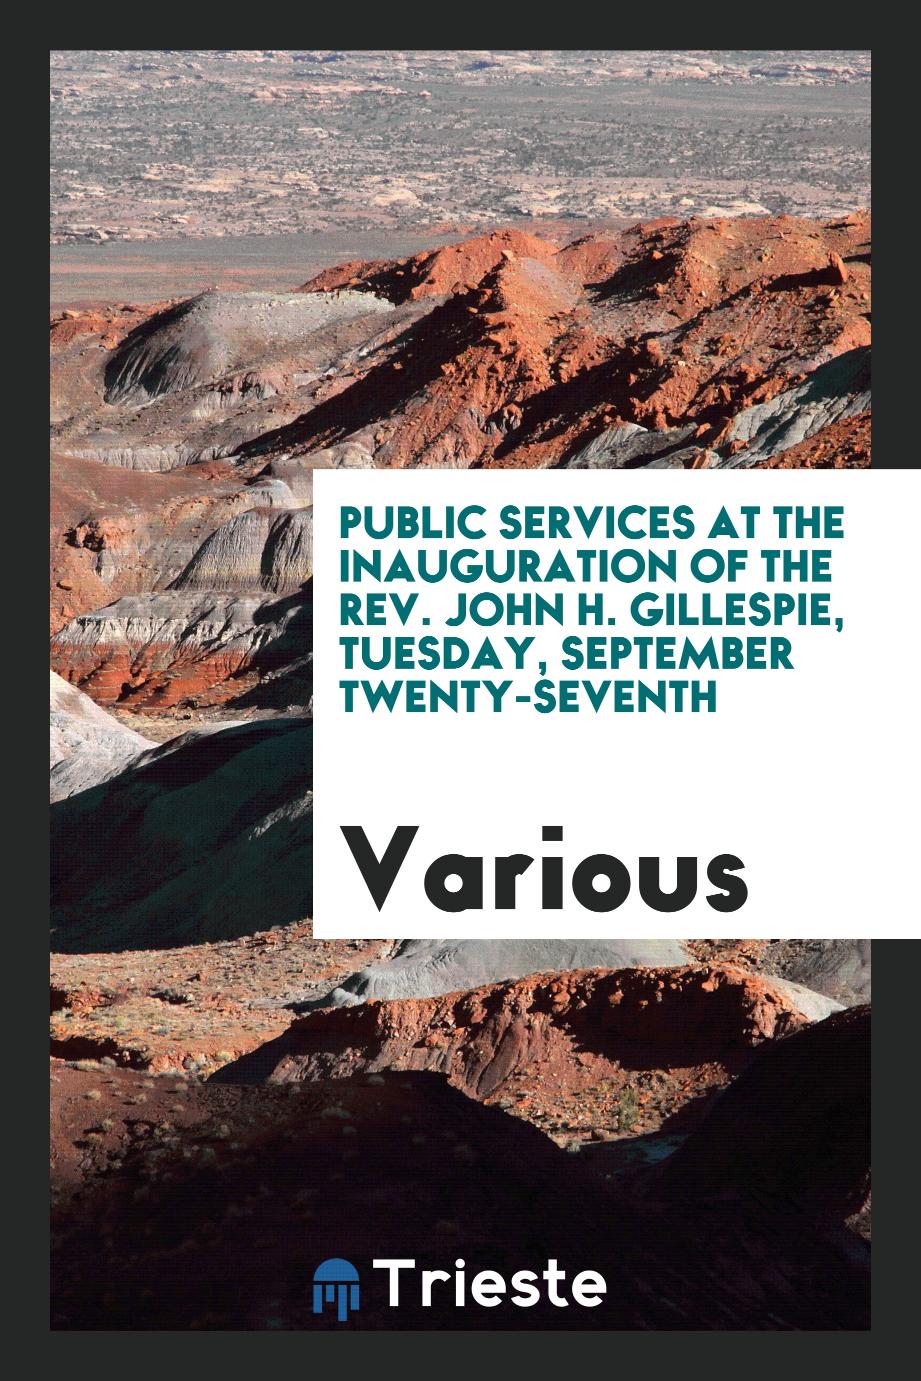 Public Services at the Inauguration of the Rev. John H. Gillespie, Tuesday, September Twenty-seventh